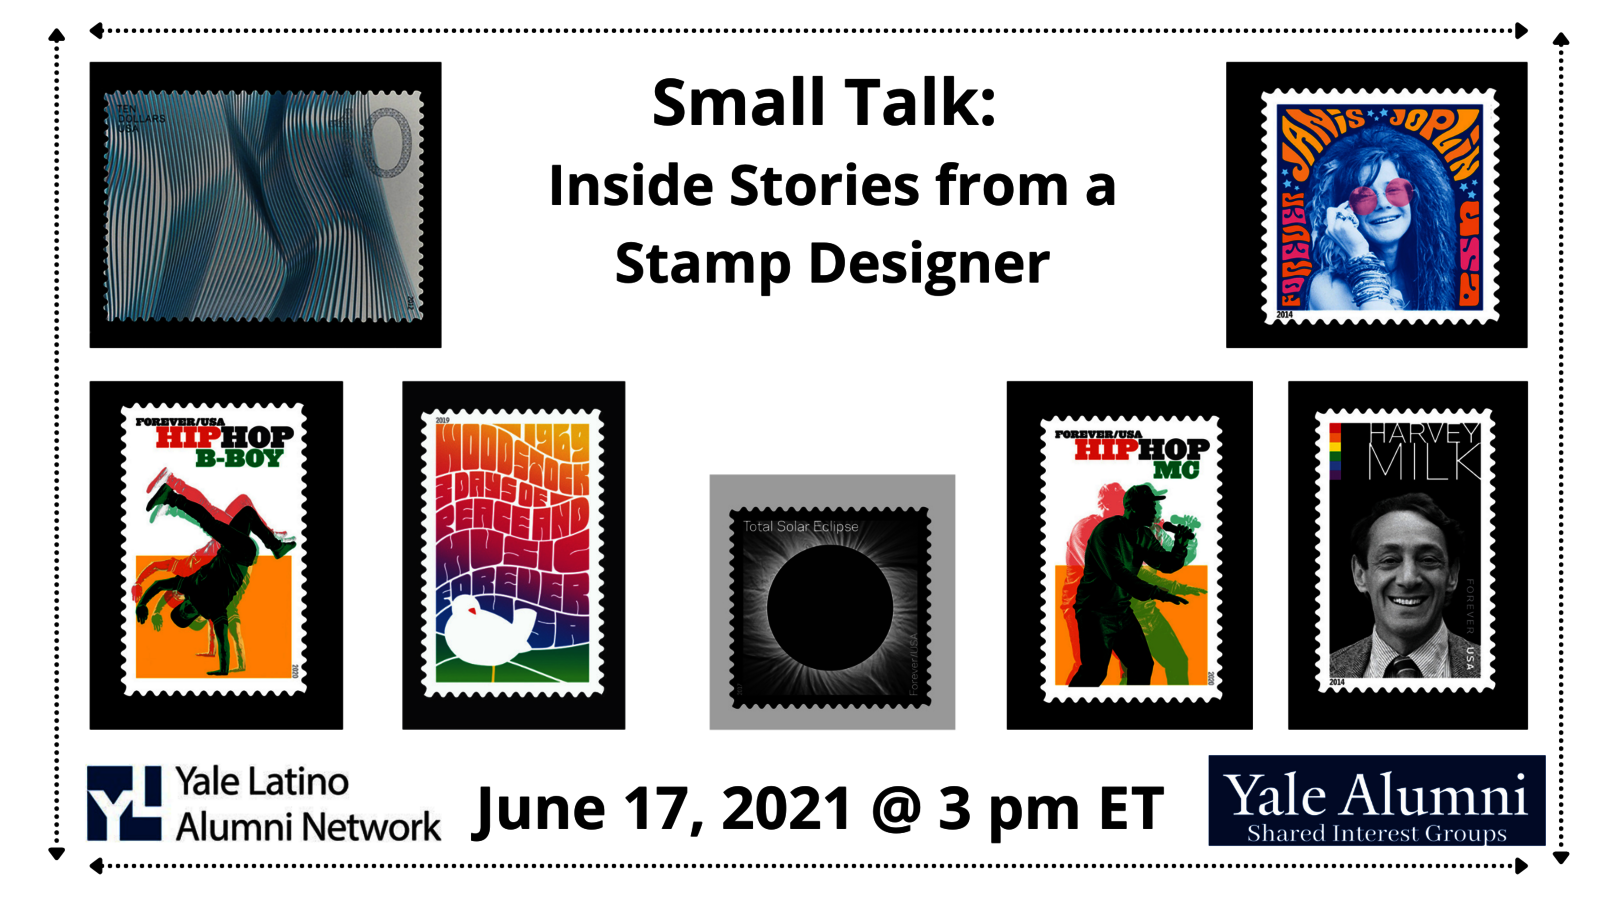 17June2021IMAGESmall Talk Inside Stories from a Stamp Designer